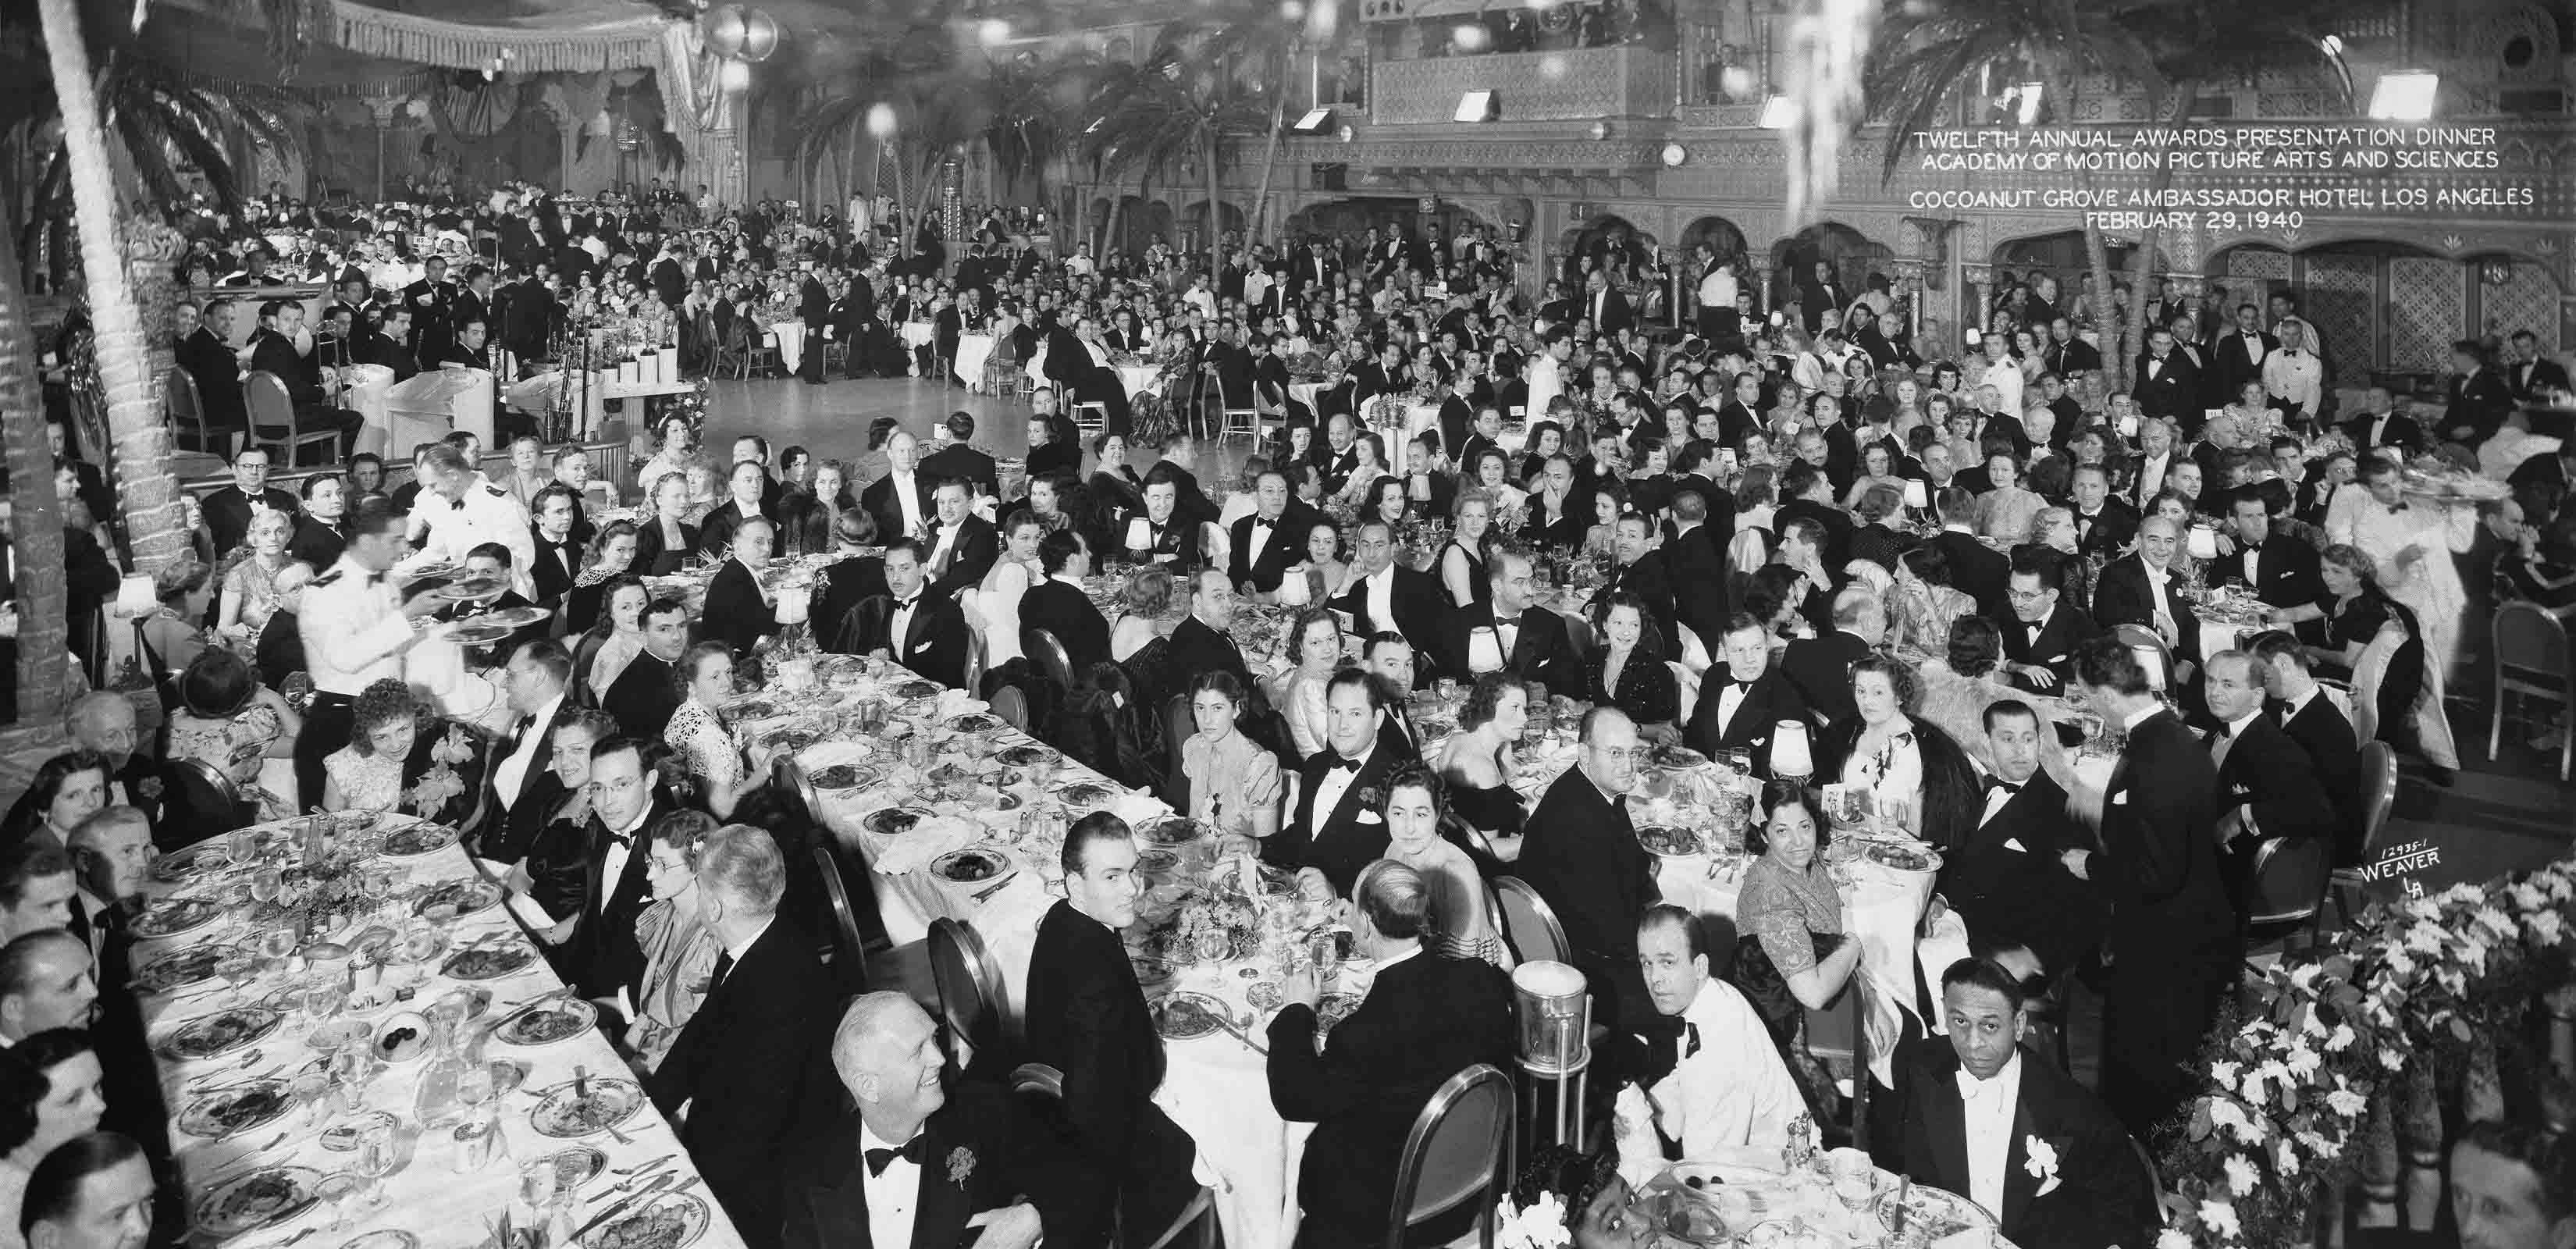 Hattie McDaniel (partially visible at lower edge) and Ferdinand Yober, at the banquet for the 12th Academy Awards, Cocoanut Grove, Ambassador Hotel, 1940. Courtesy Margaret Herrick Library.
